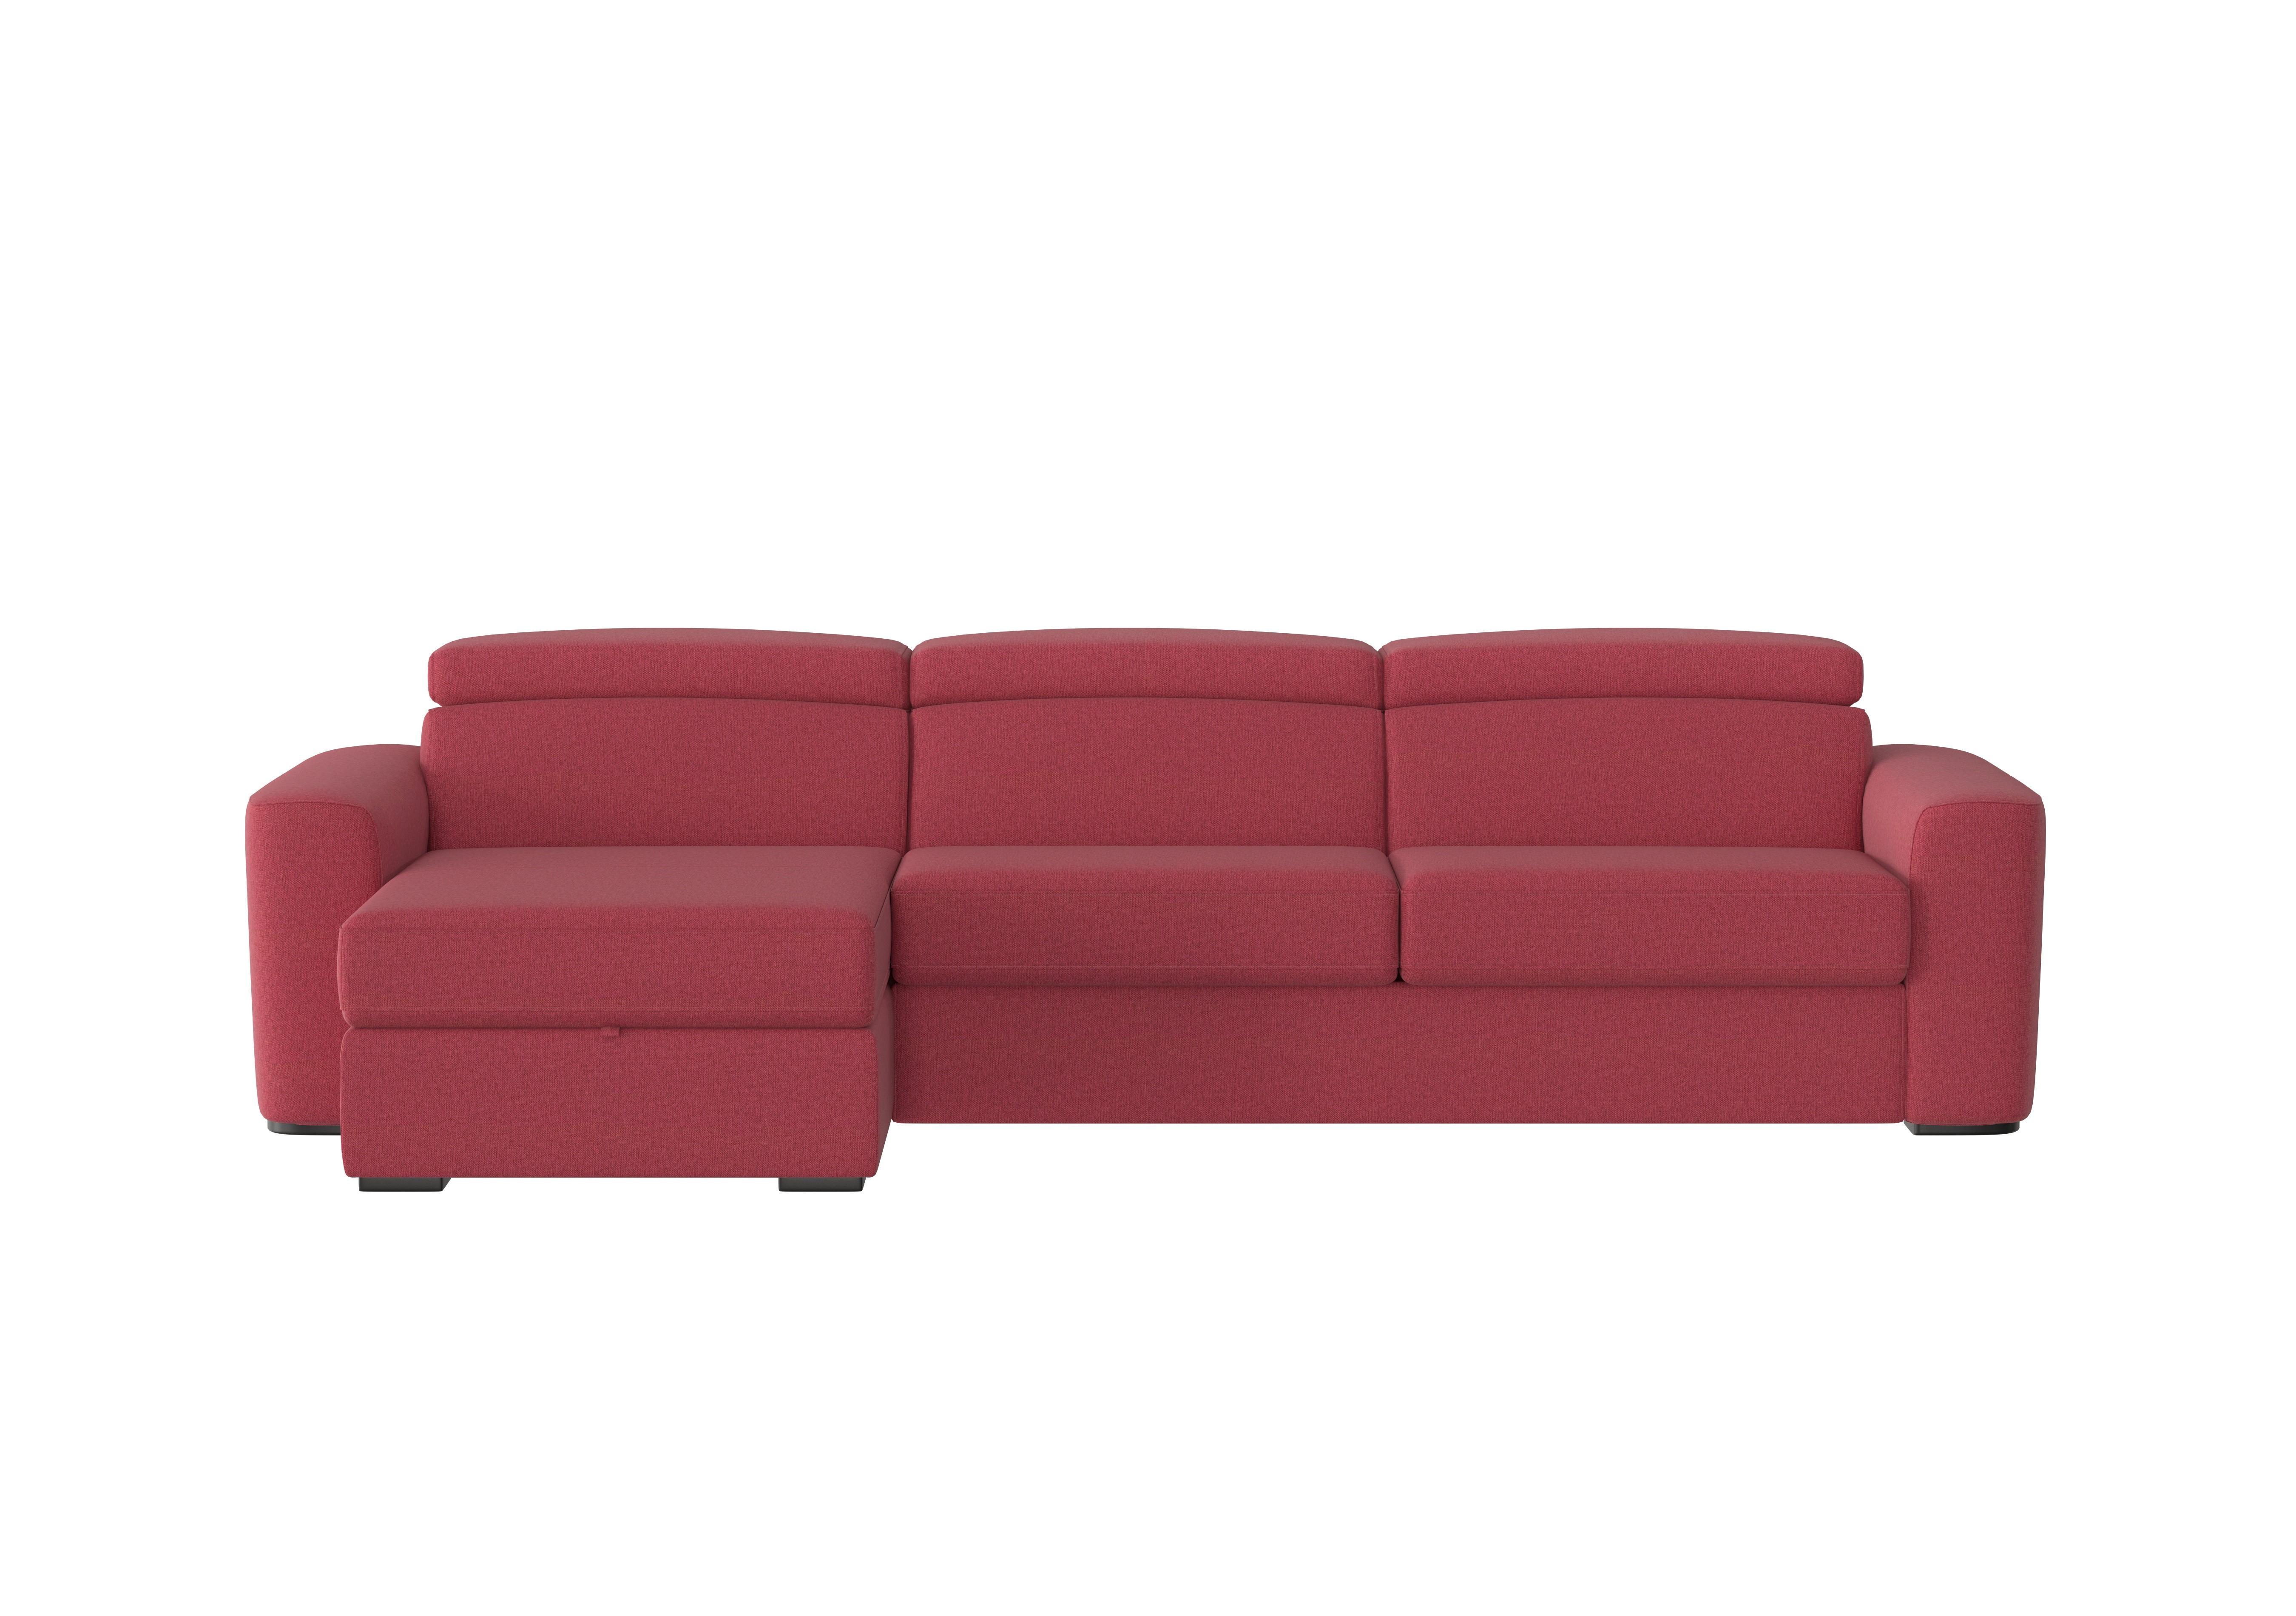 Infinity Fabric Corner Chaise Sofa Bed with Storage in Fab-Blt-R29 Red on Furniture Village